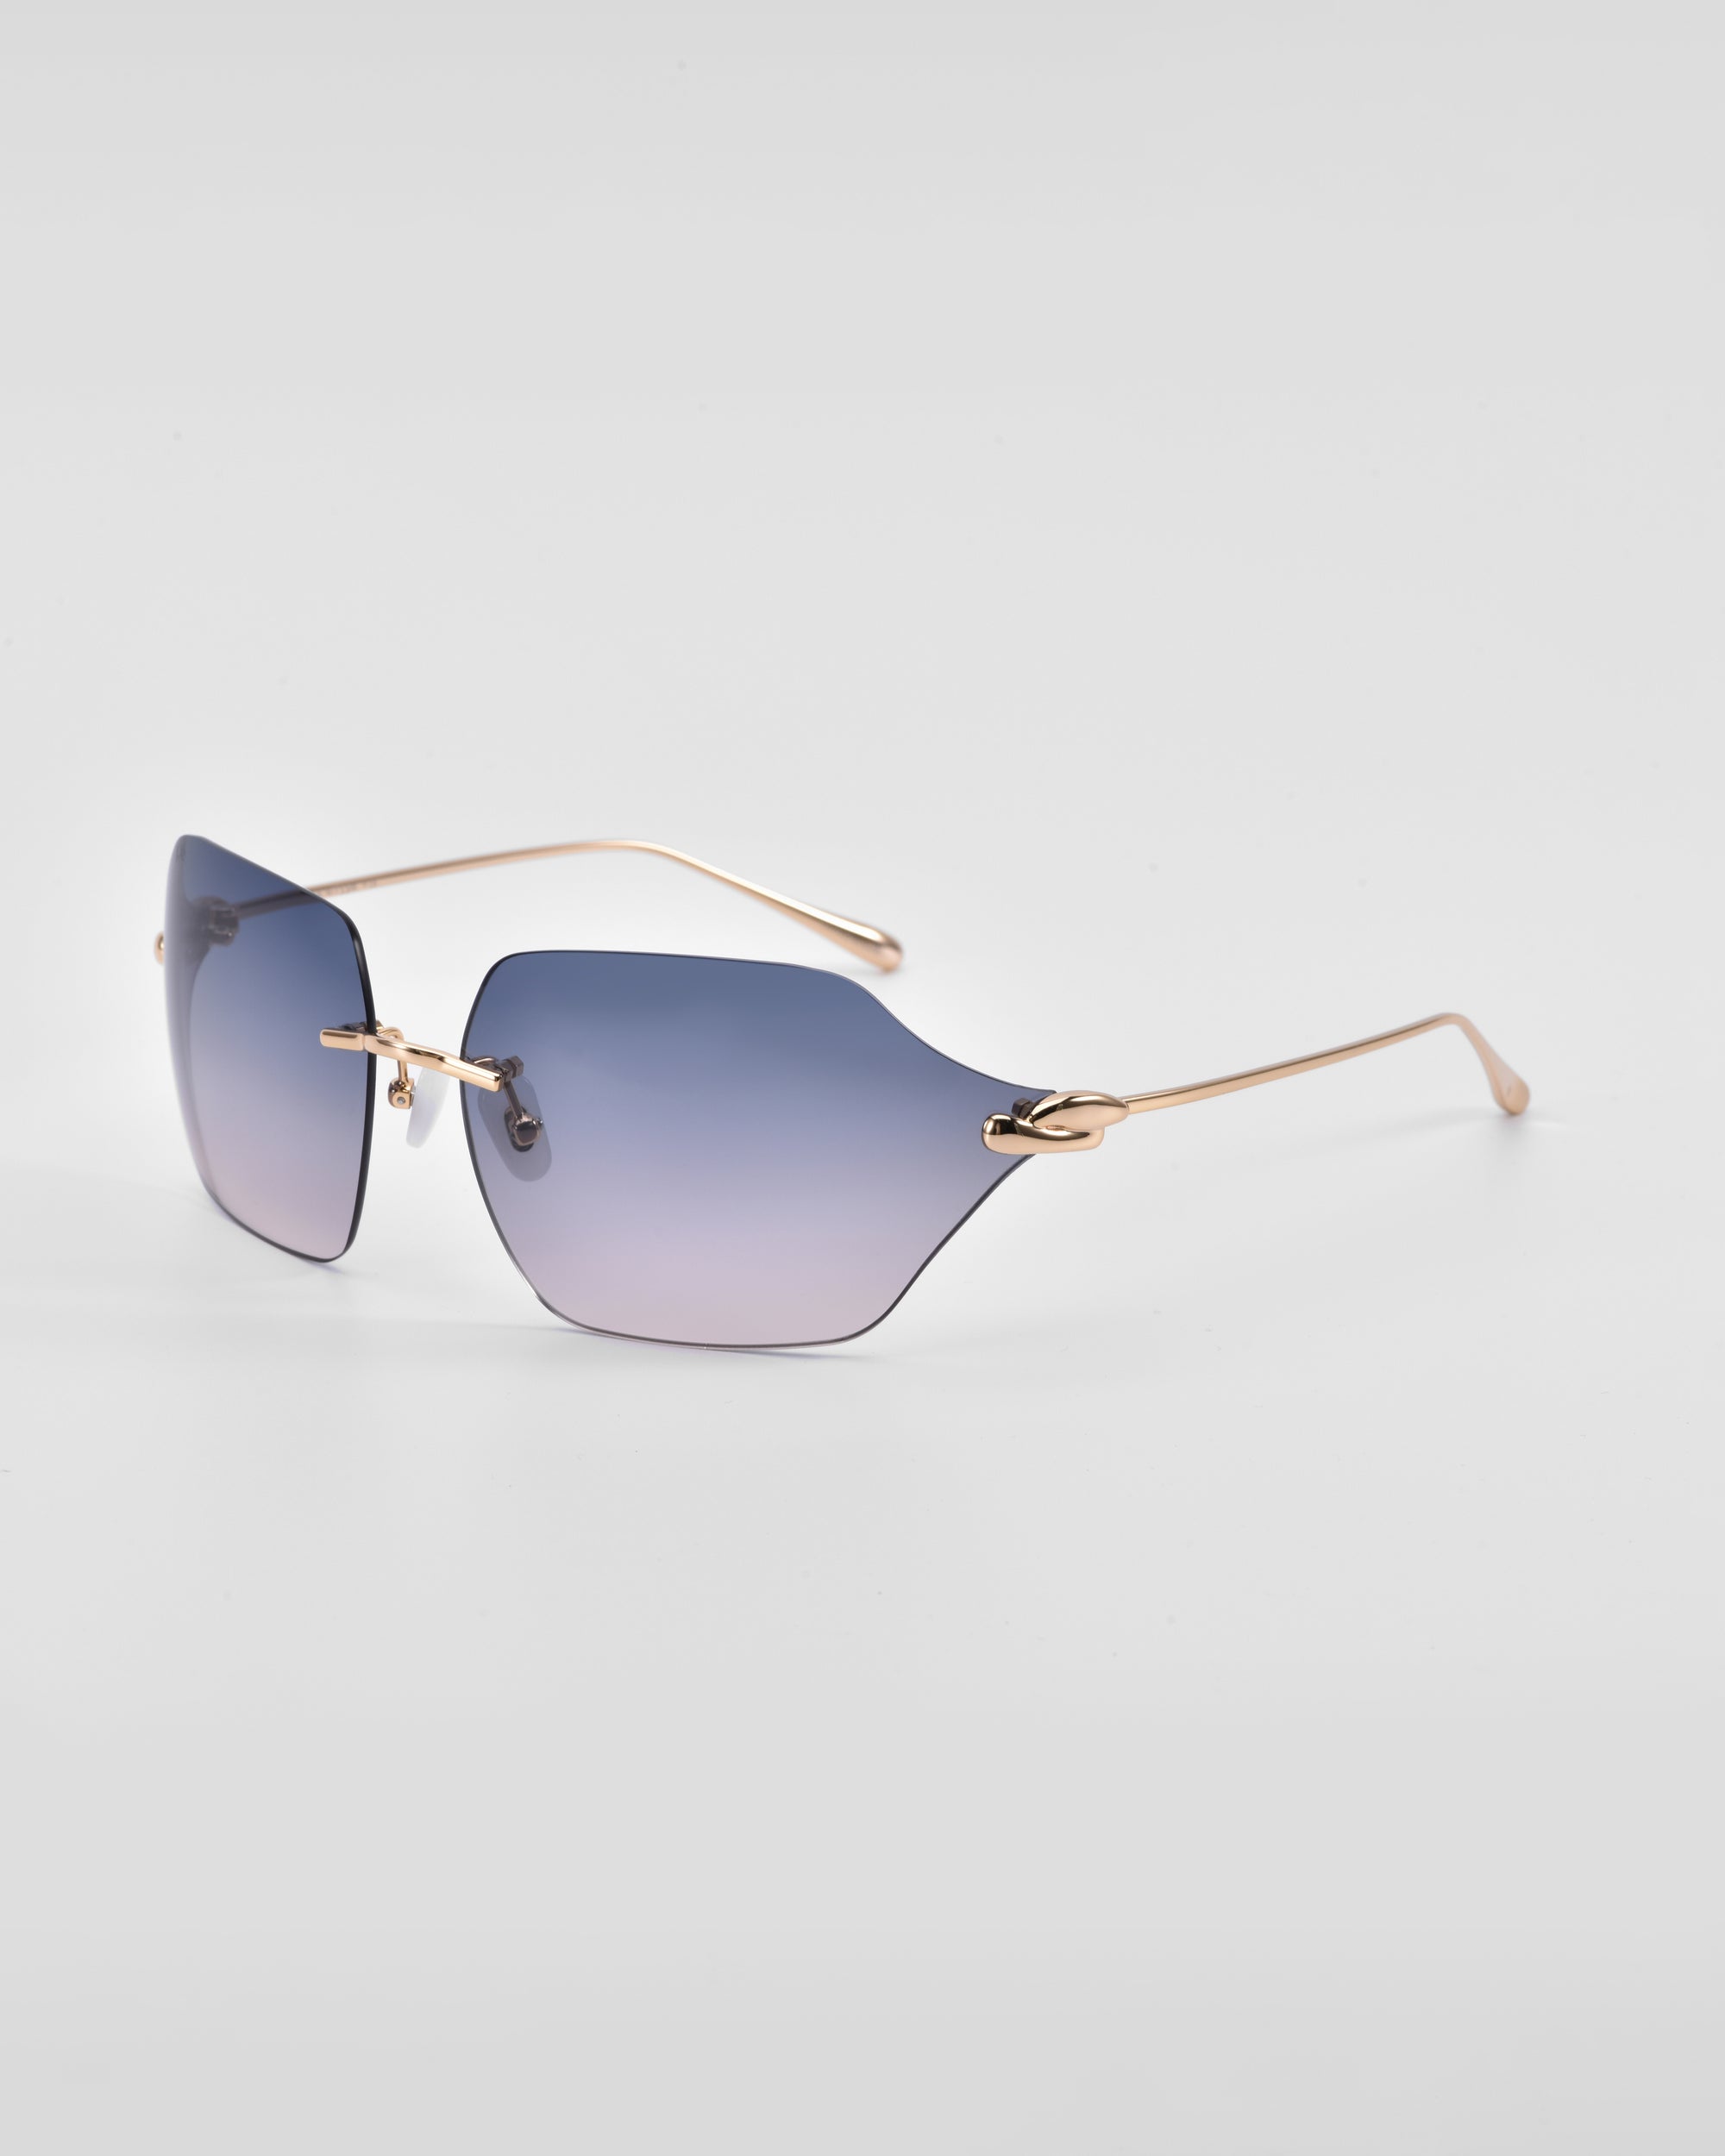 A pair of stylish For Art's Sake® Serpent II sunglasses featuring 18-karat gold plating on thin metal arms and a frameless wrap lens design with gradient lenses transitioning from a dark shade to a lighter blue at the bottom, set against a plain white background.